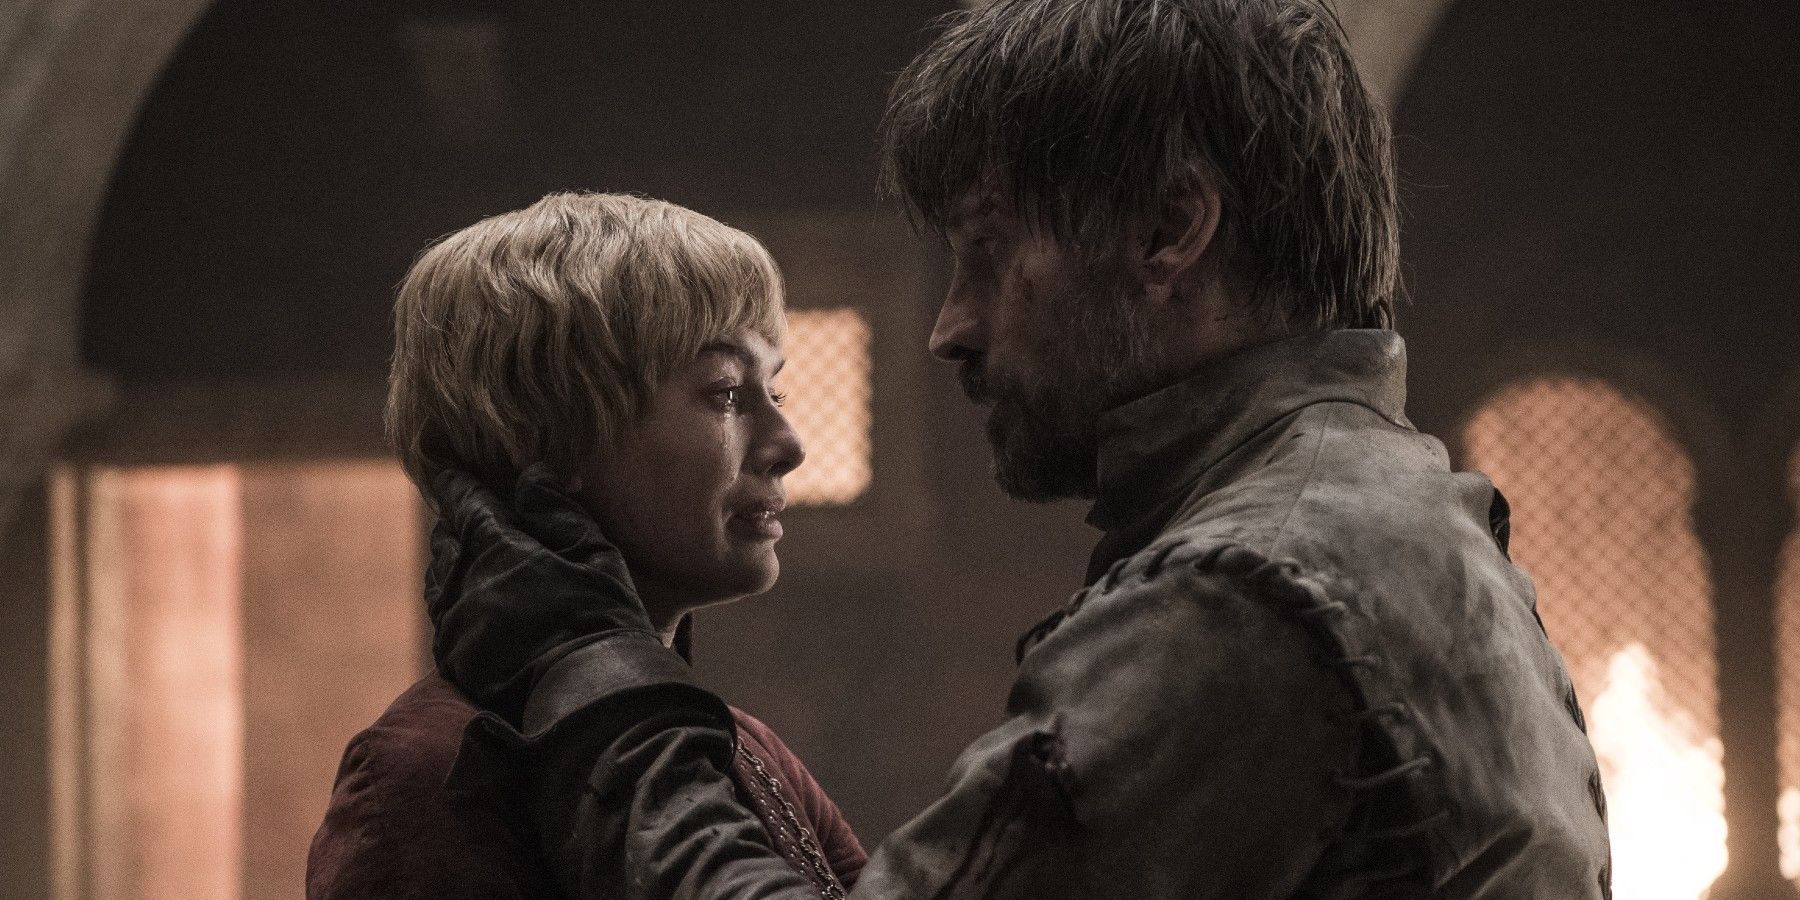 Cersei and Jaime embracing before their death in Game of Thrones